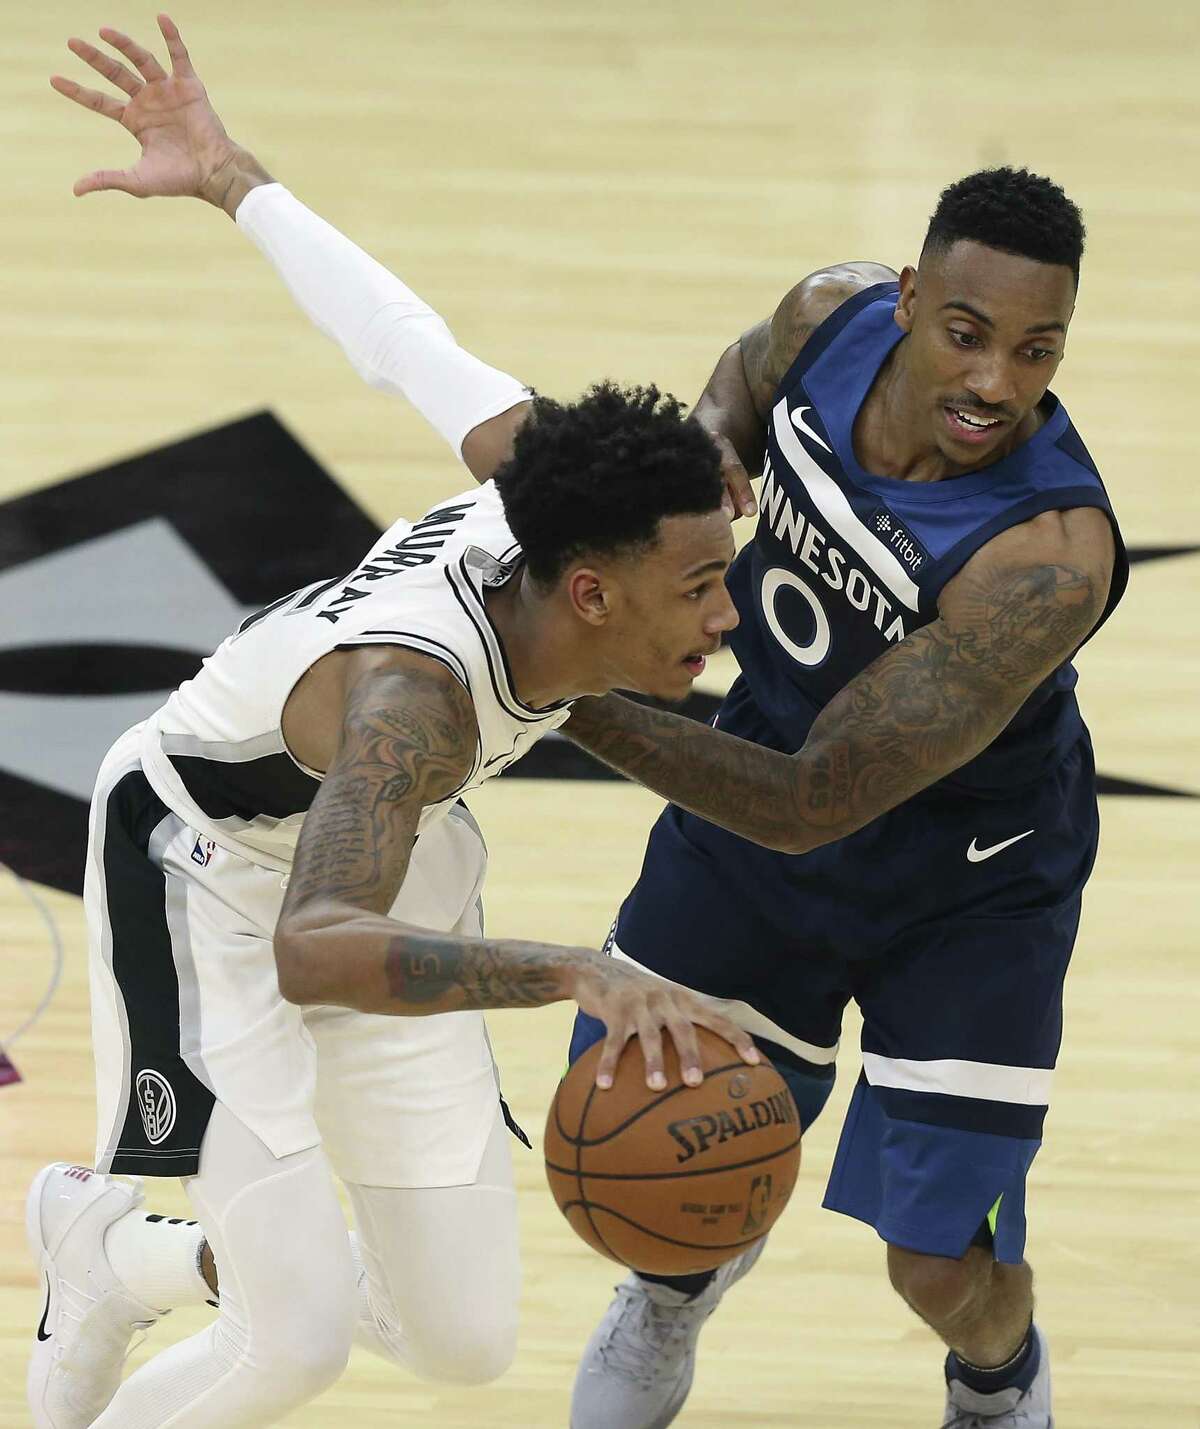 Dejounte Murray gets by Jeff Teague as the Spurs play Minnesota in the season opener at the AT&T Center on October 18, 2017.